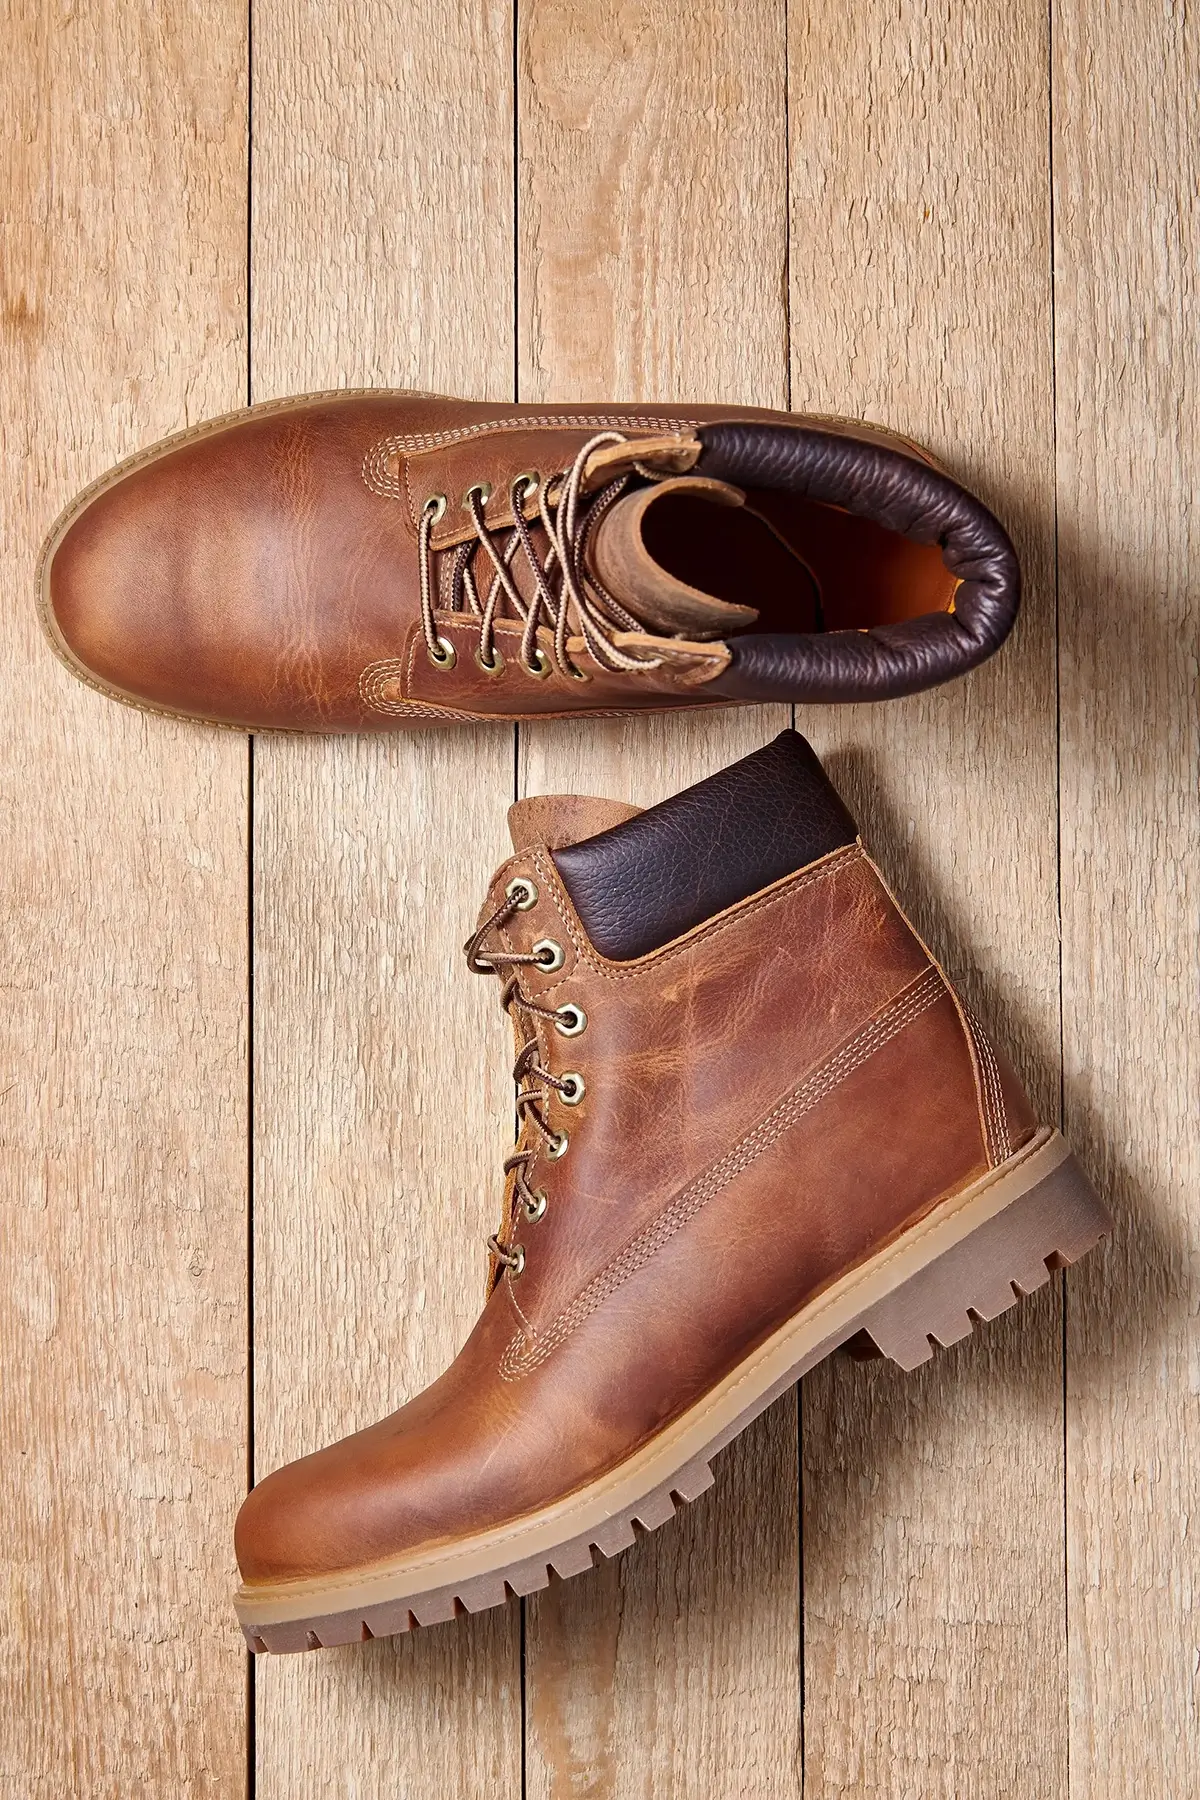 pair-of-men-leather-brown-waterproof-boots-for-winter-or-autumn-hiking-on-wooden-floor